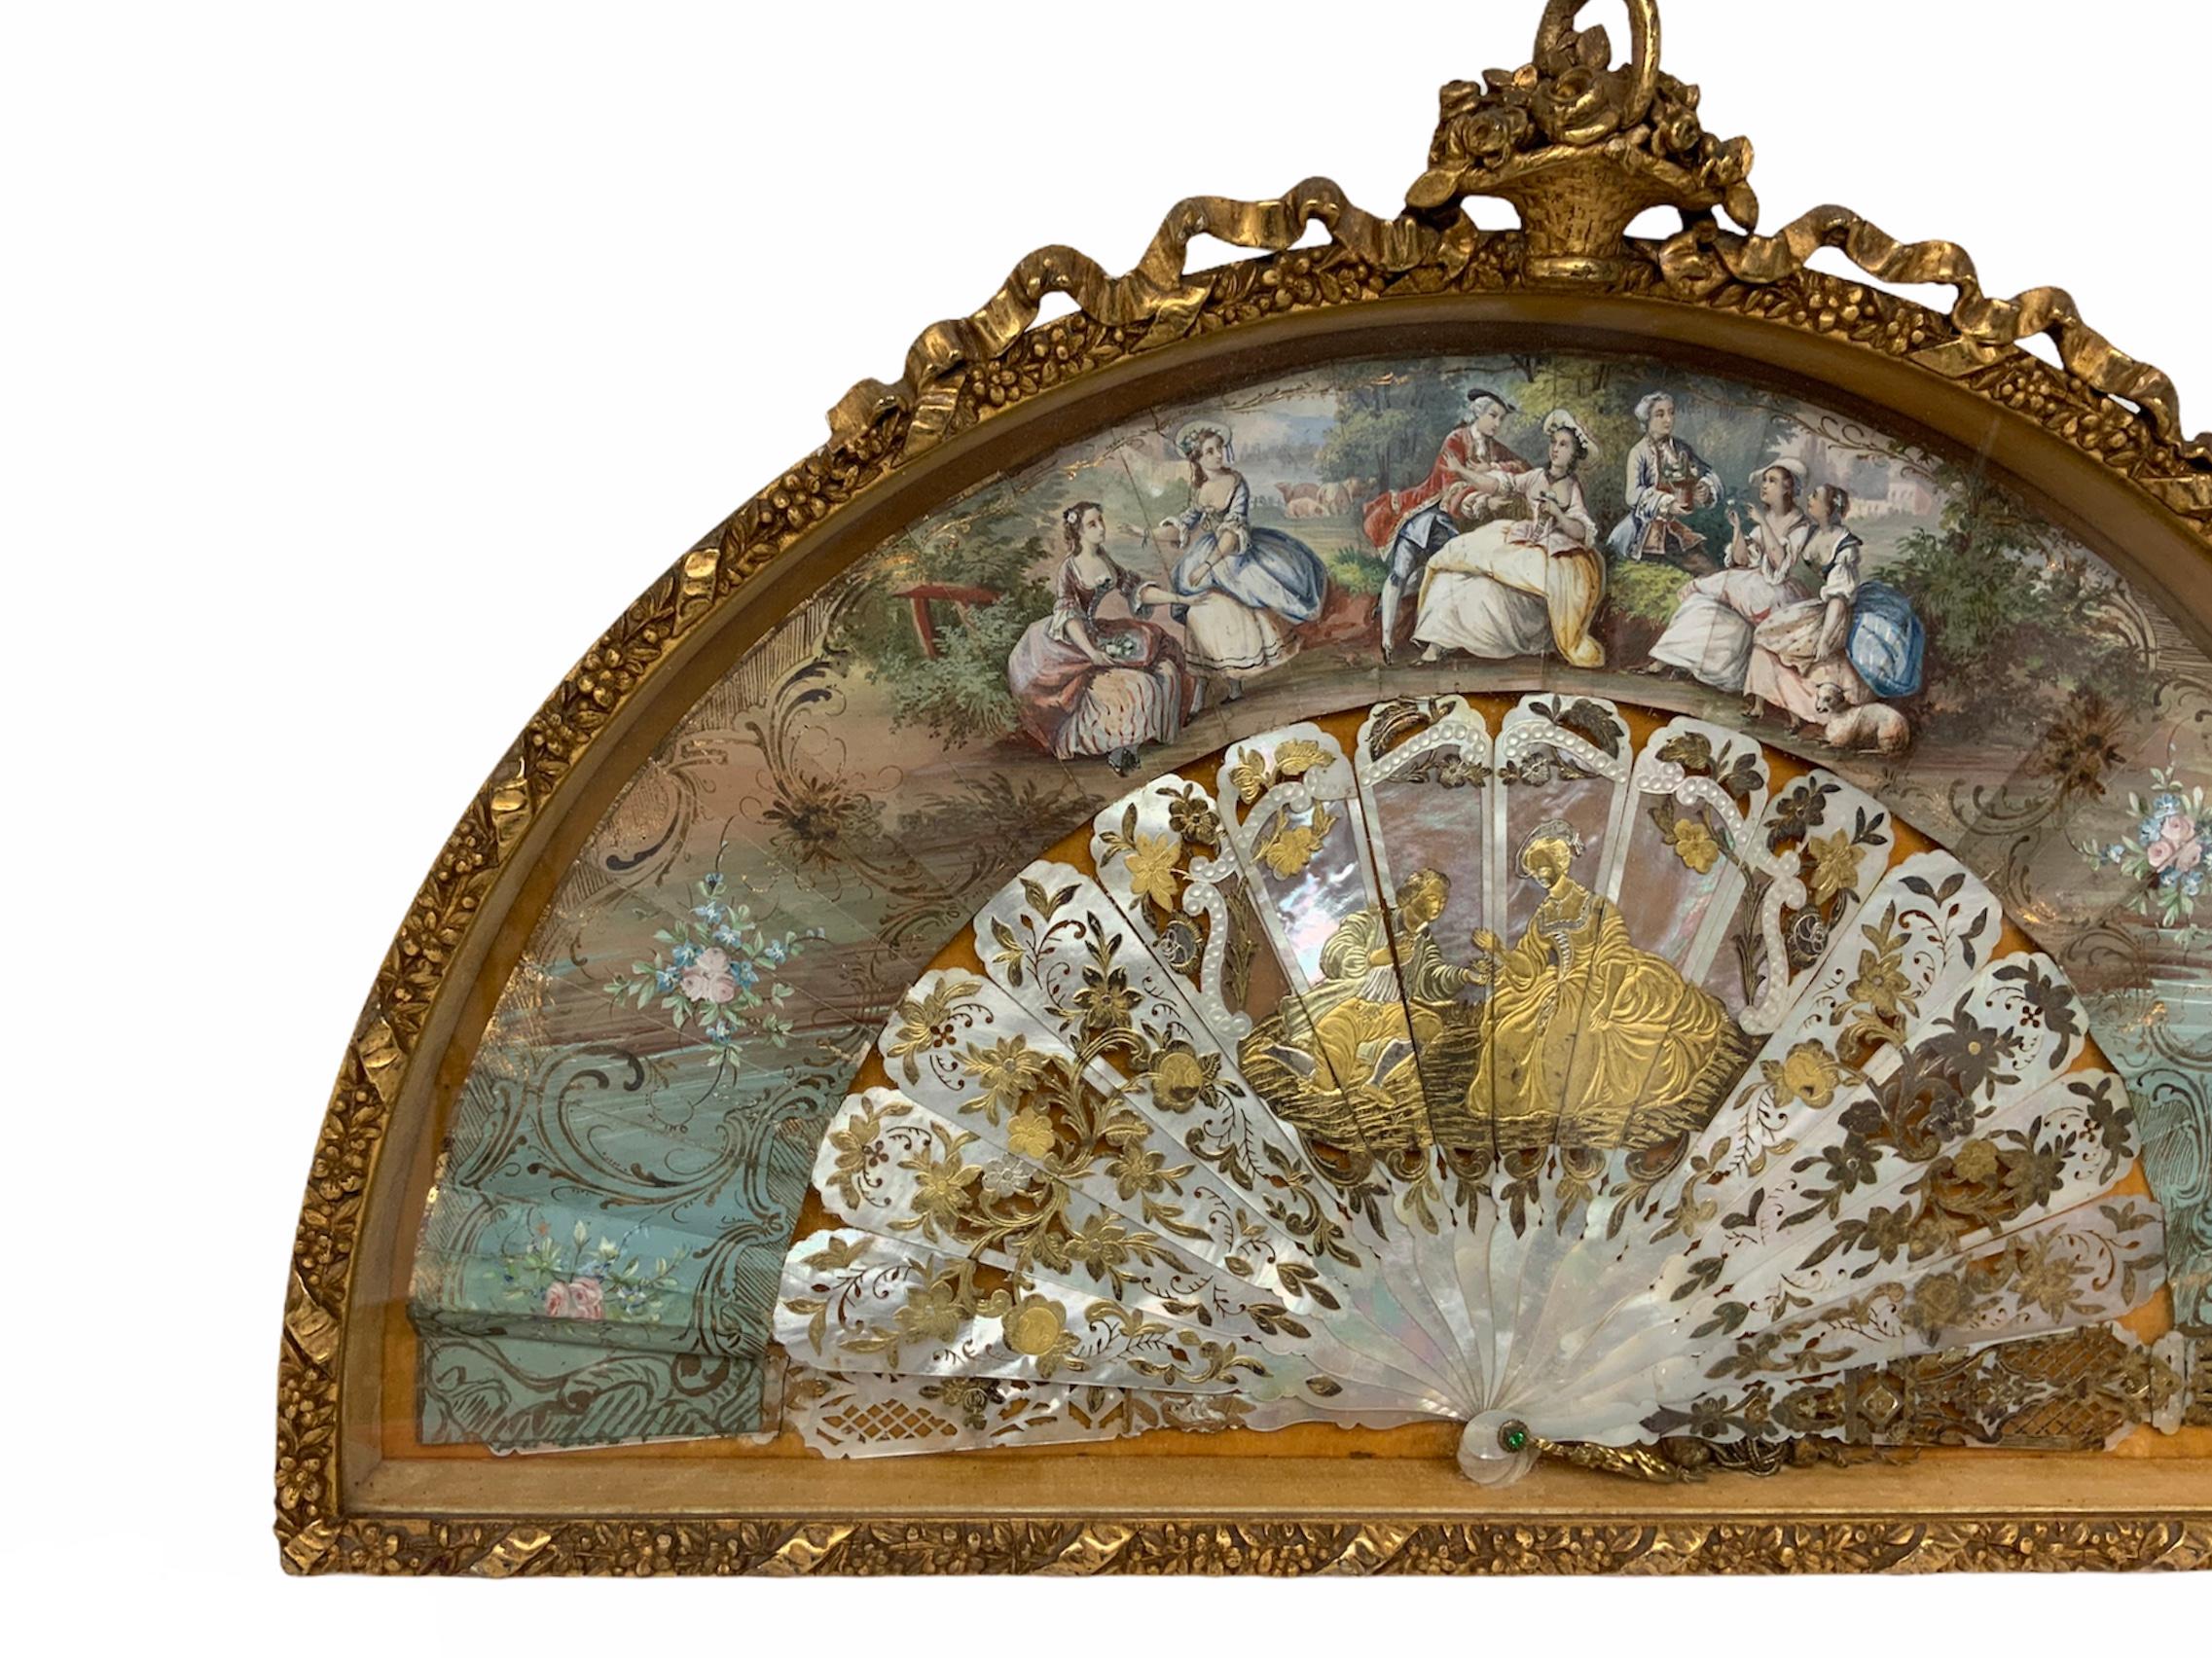 This is a hand painted ladies fan with an 18th century scene of a courting couple in a pastoral landscape. Also the reticulated mother of pearls sticks depict a gilded scene of a courting couple surrounded by flowers. The fan is framed in a gilded